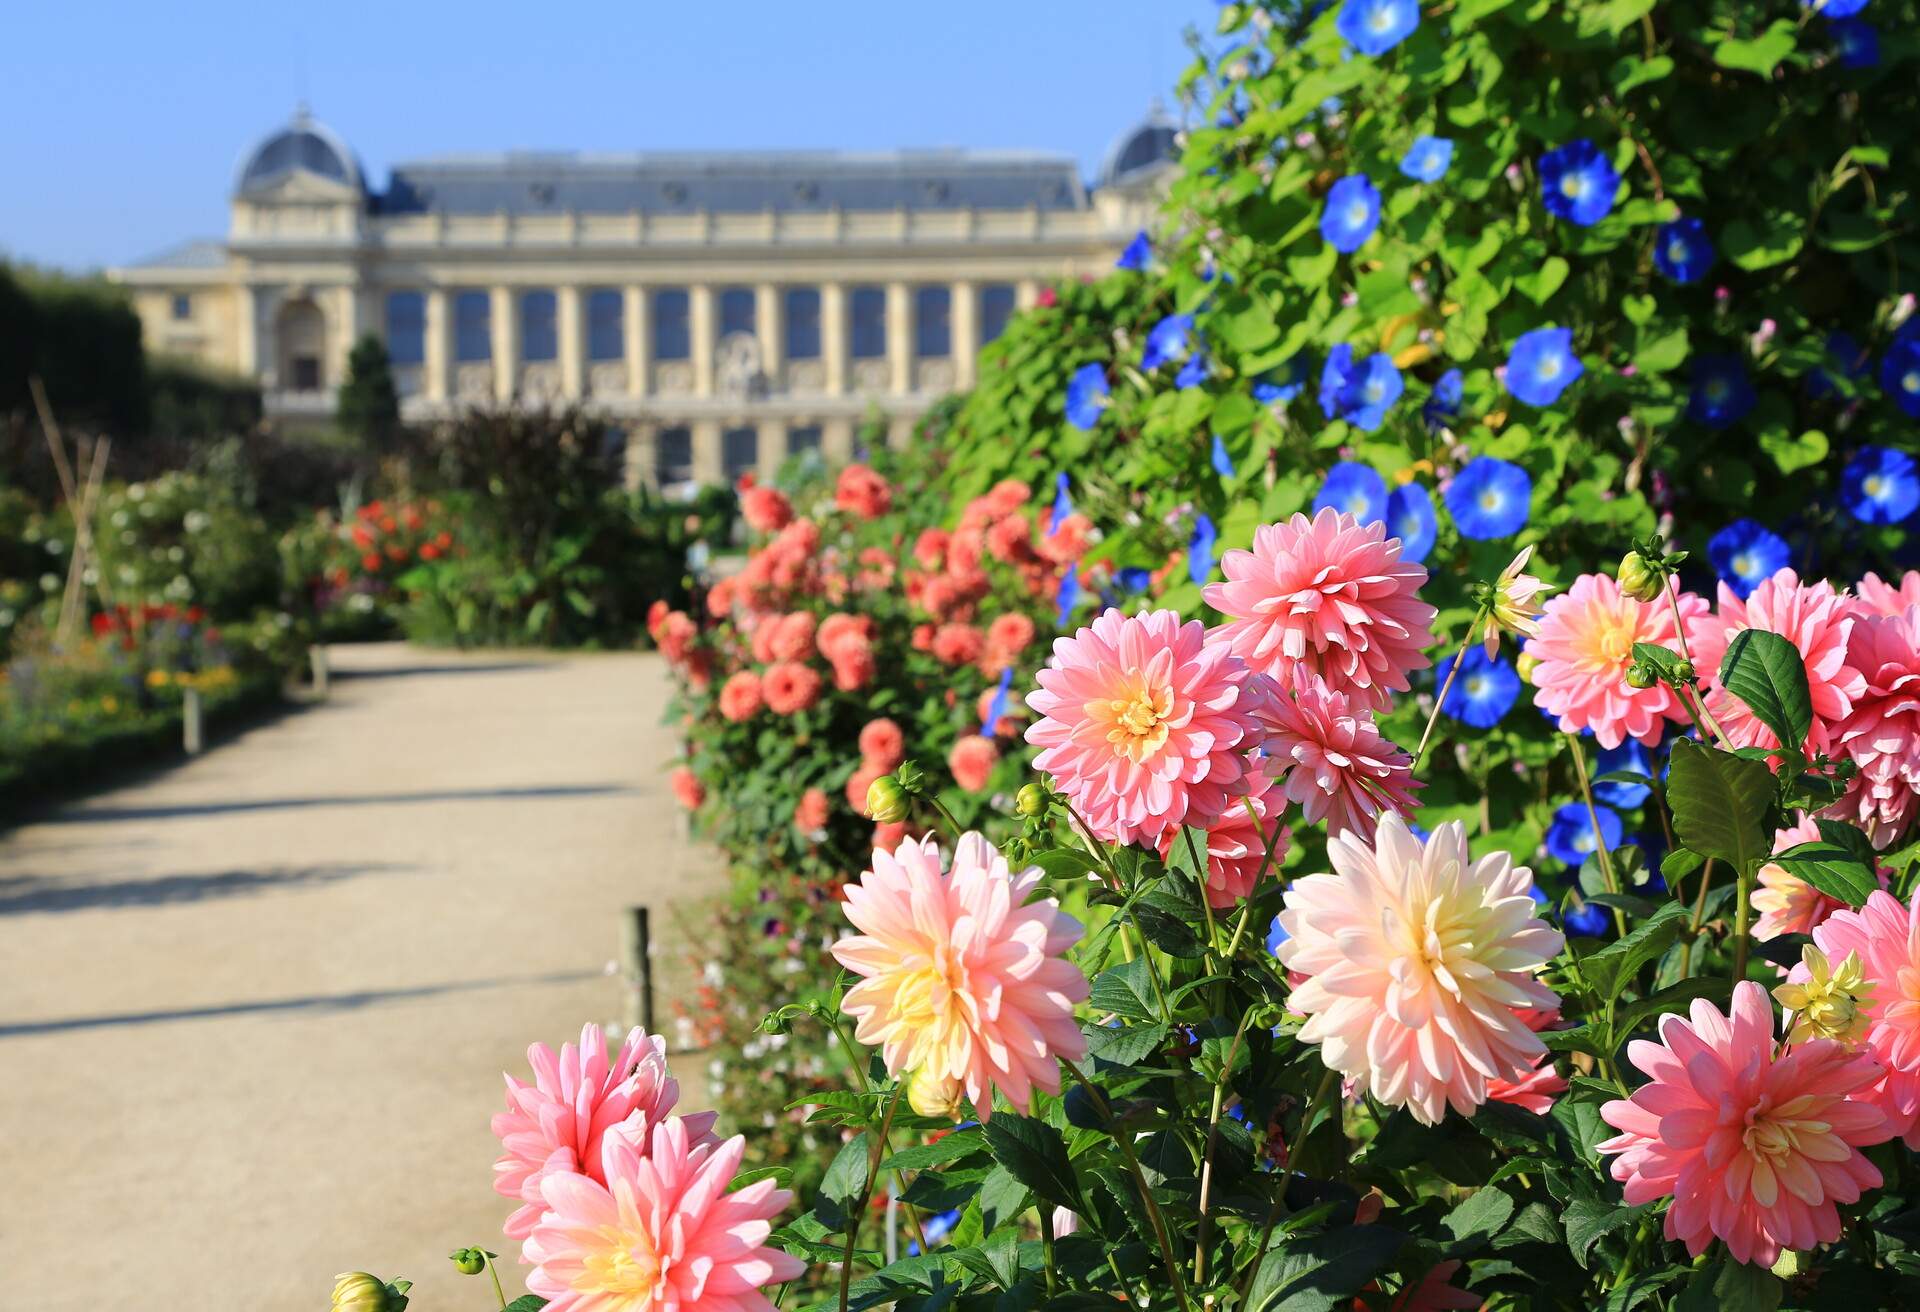 Jardin de Plantes, main botanical garden in France. The exterior of the Grande Galerie de l'évolution (Great Evolution Galery), part of the National museum of the natural history on the background and beatutiful autumn flowers on the foreground.